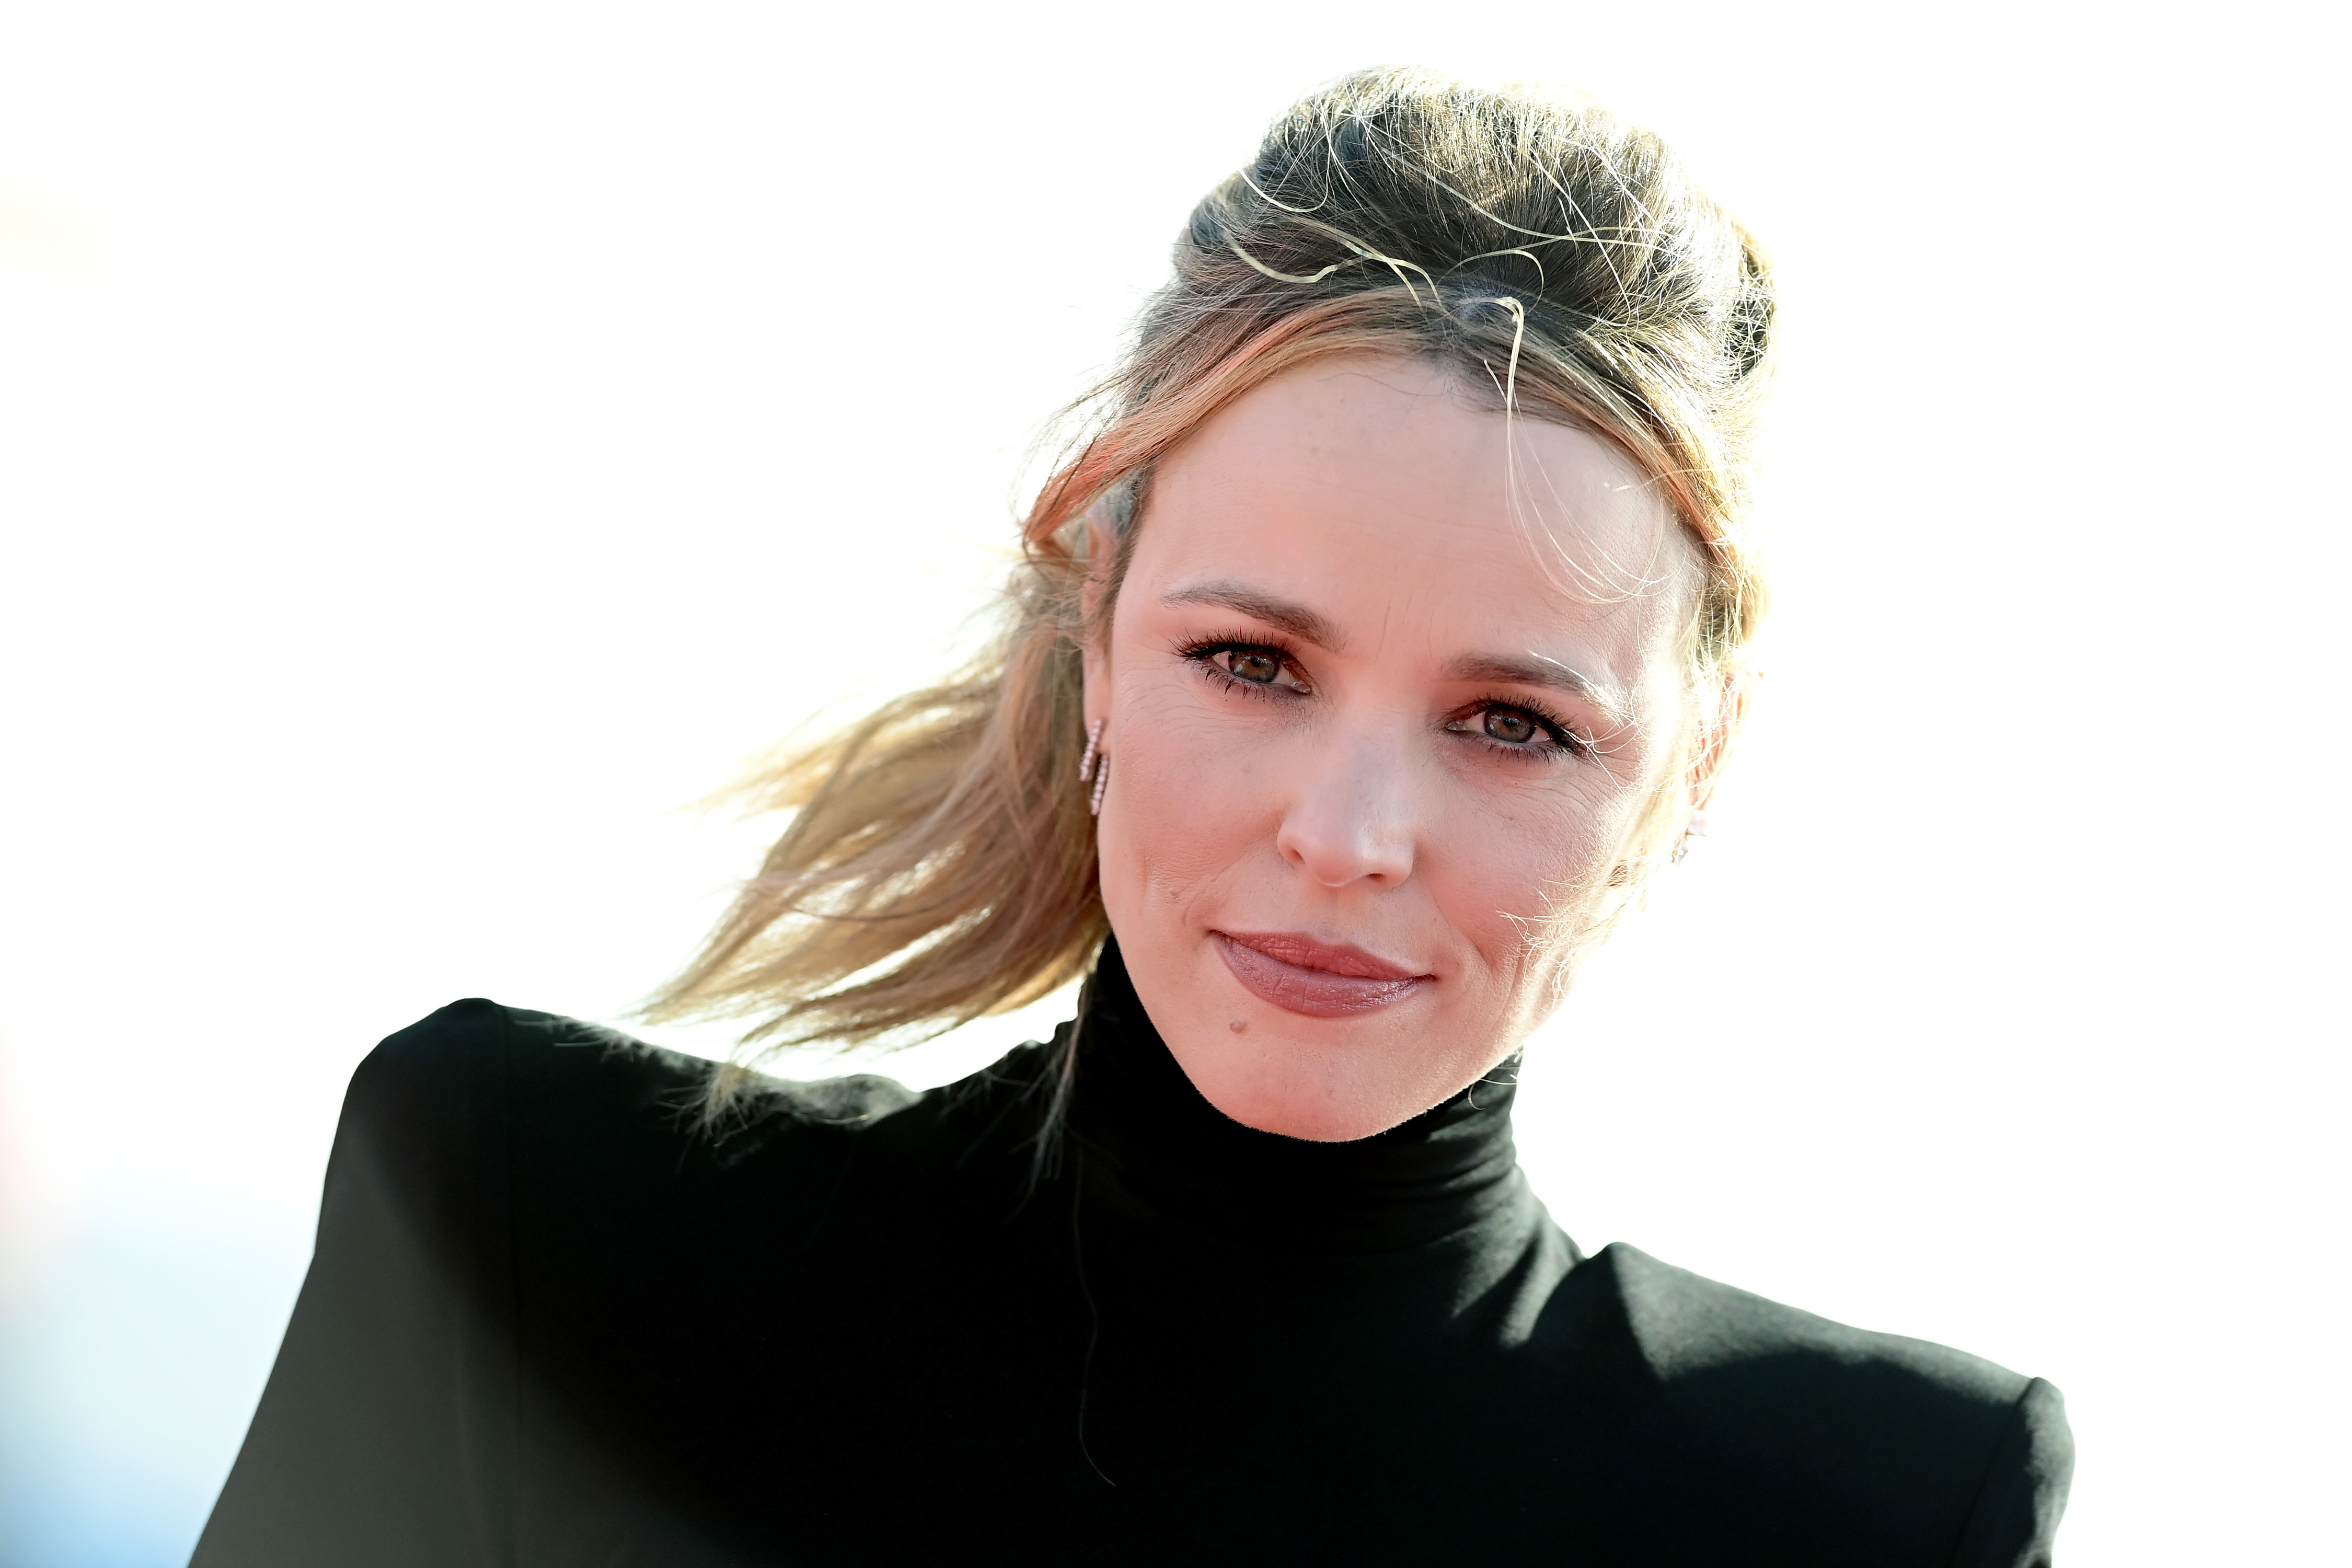 Rachel McAdams attends the "Top Gun: Maverick" world premiere on May 04, 2022, in San Diego, California. | Source: Getty Images